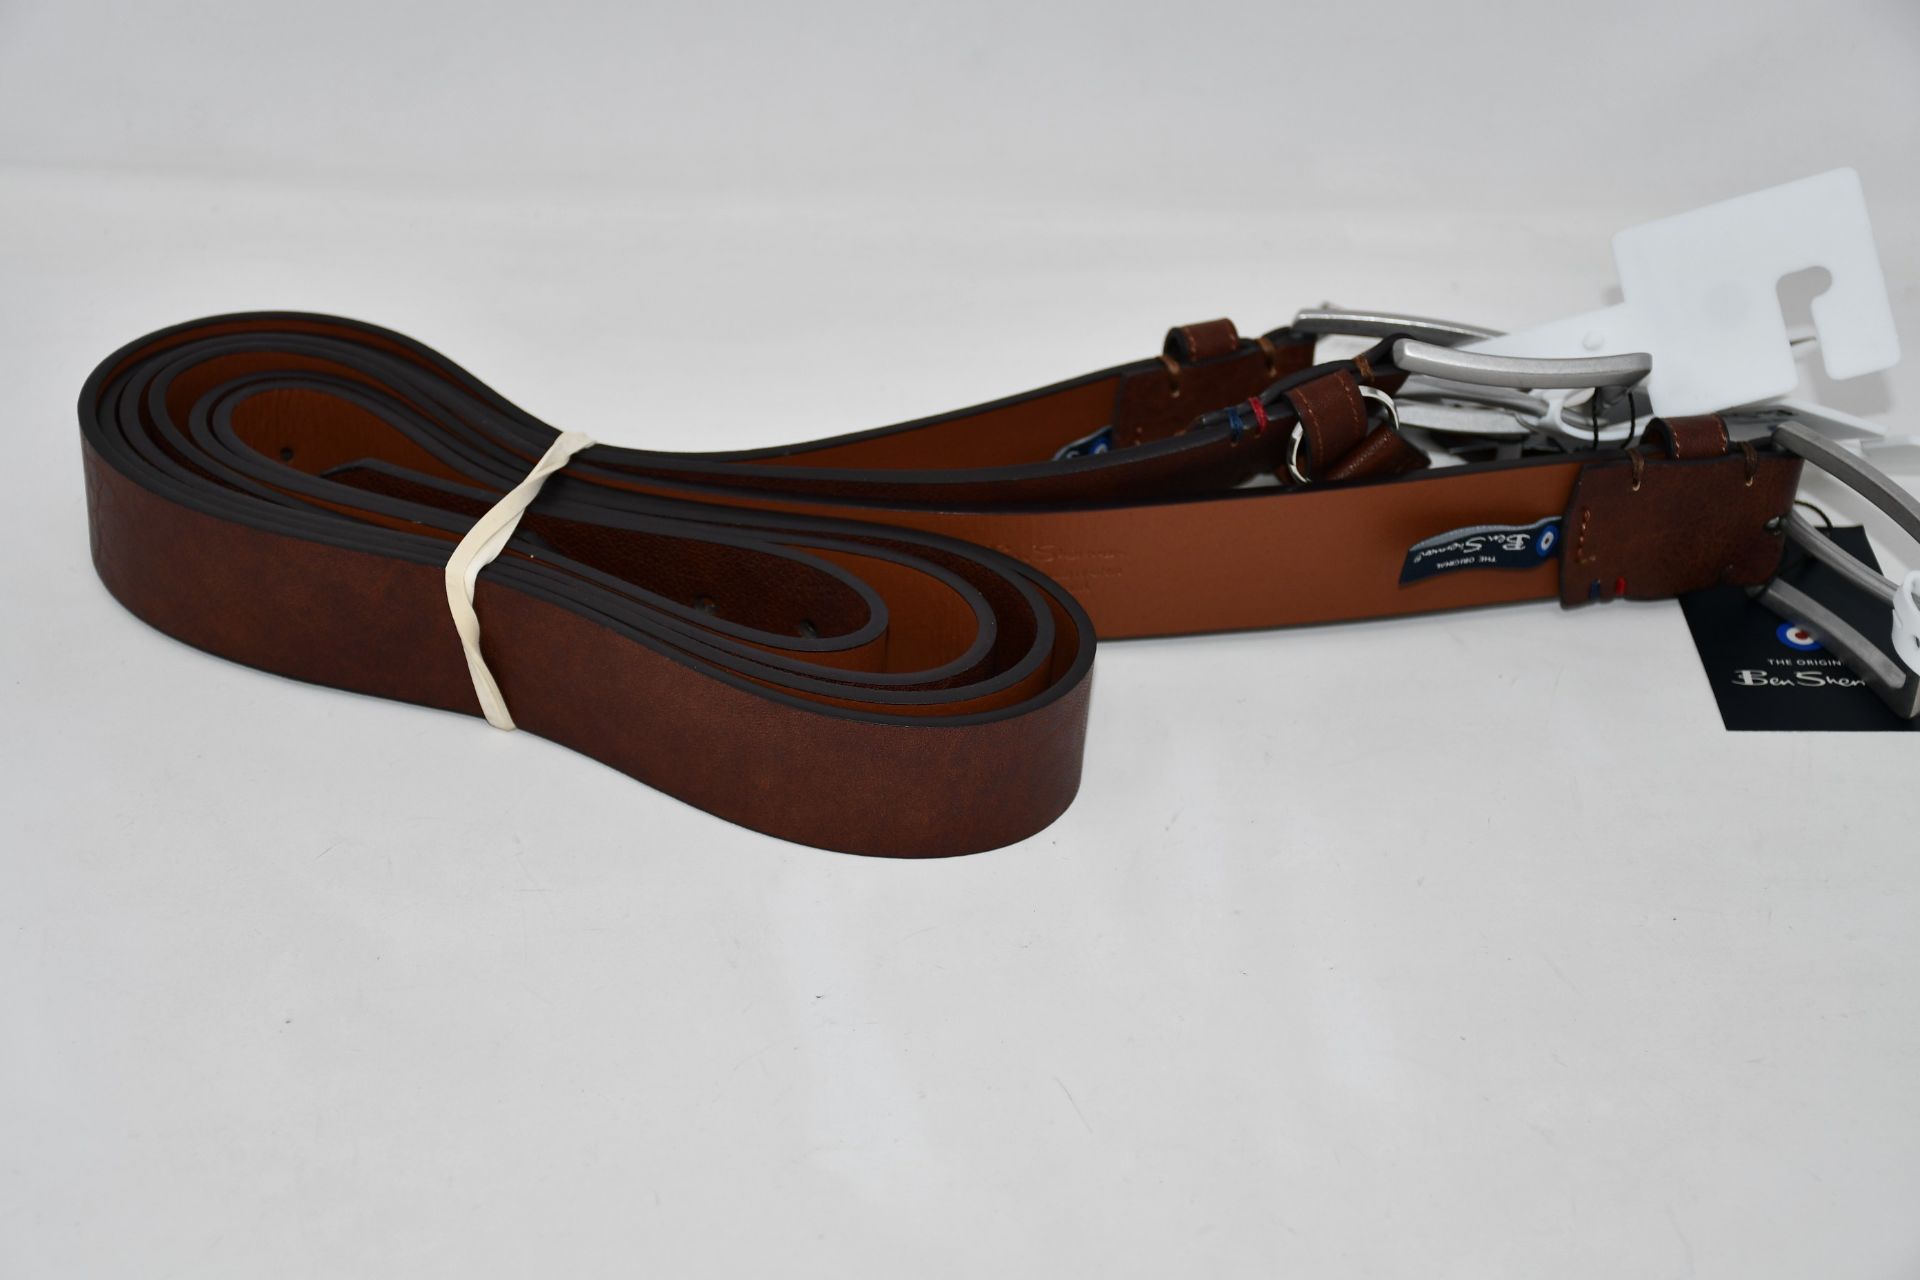 Nine as new Ben Sherman leather belts (Assorted sizes - RRP £21 each).